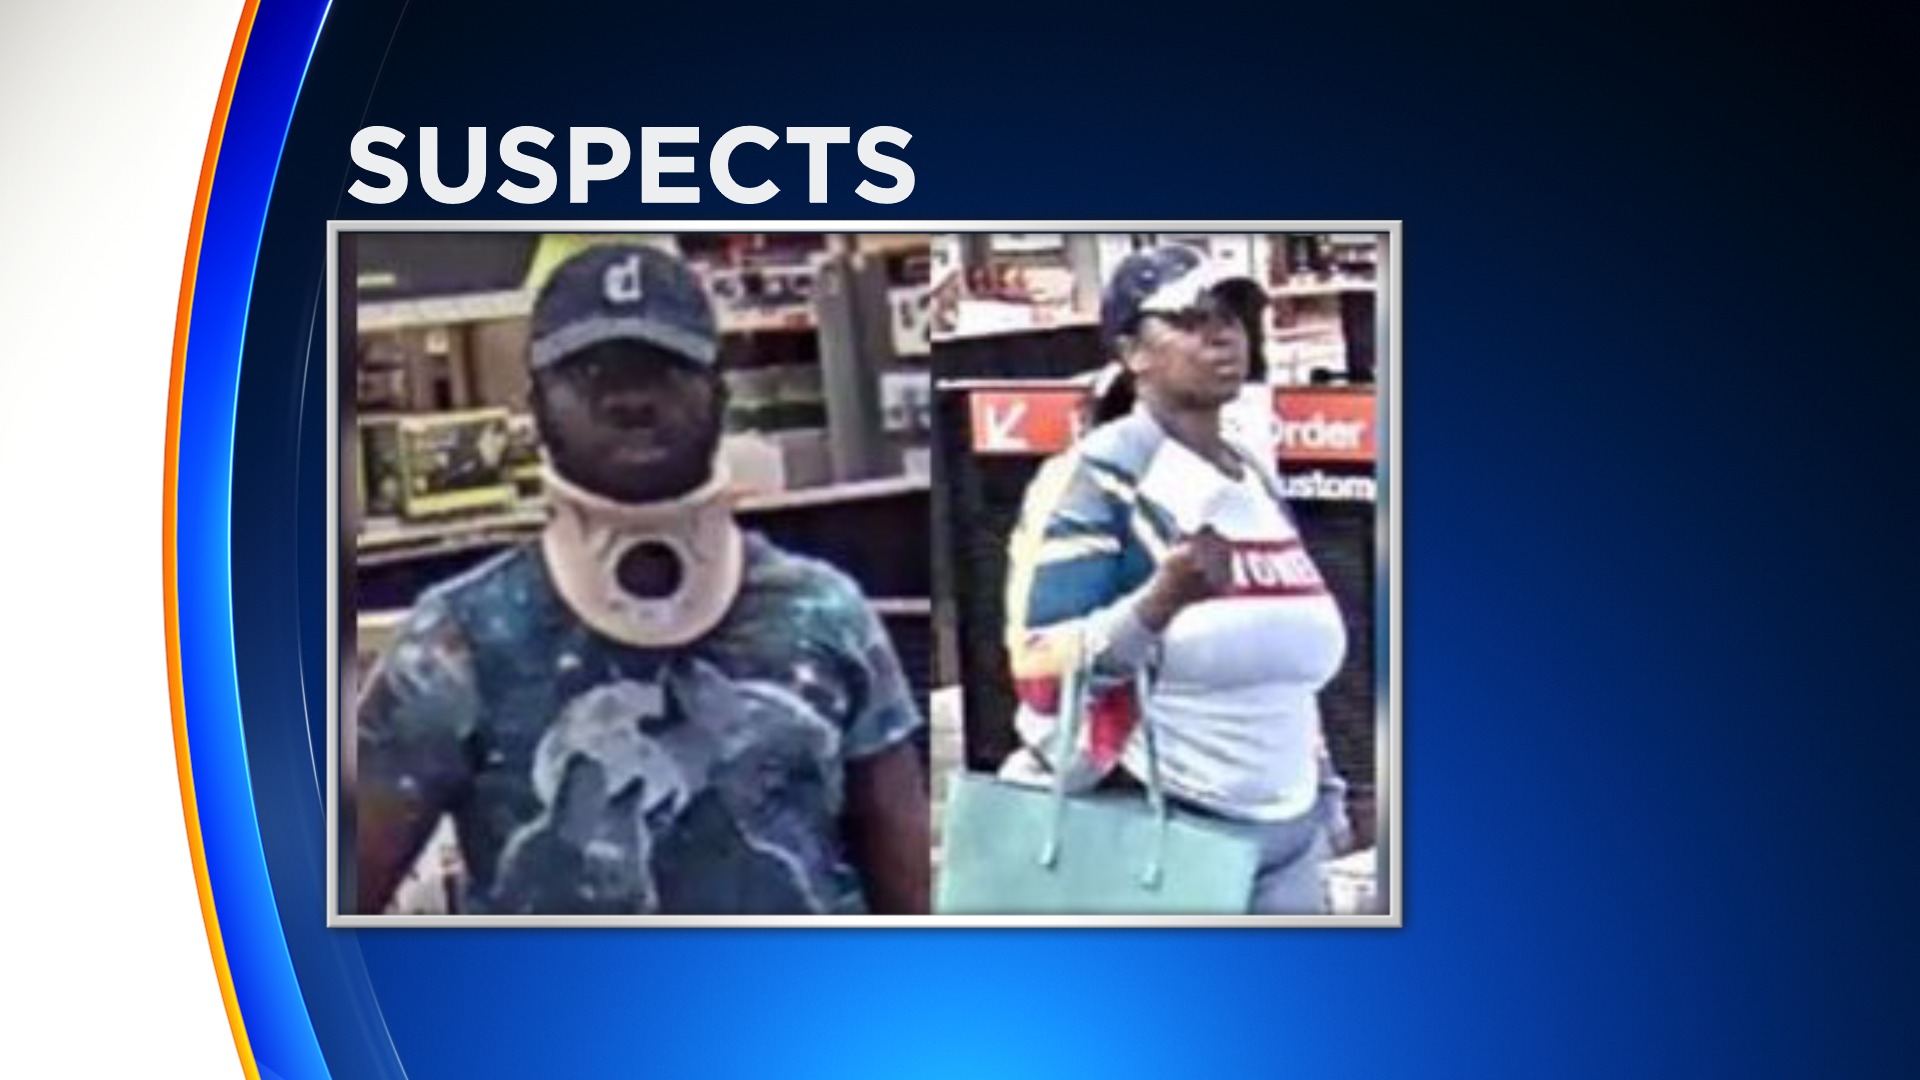 Man With Neck Brace, Woman Wanted For Theft At South Philly Home Depot